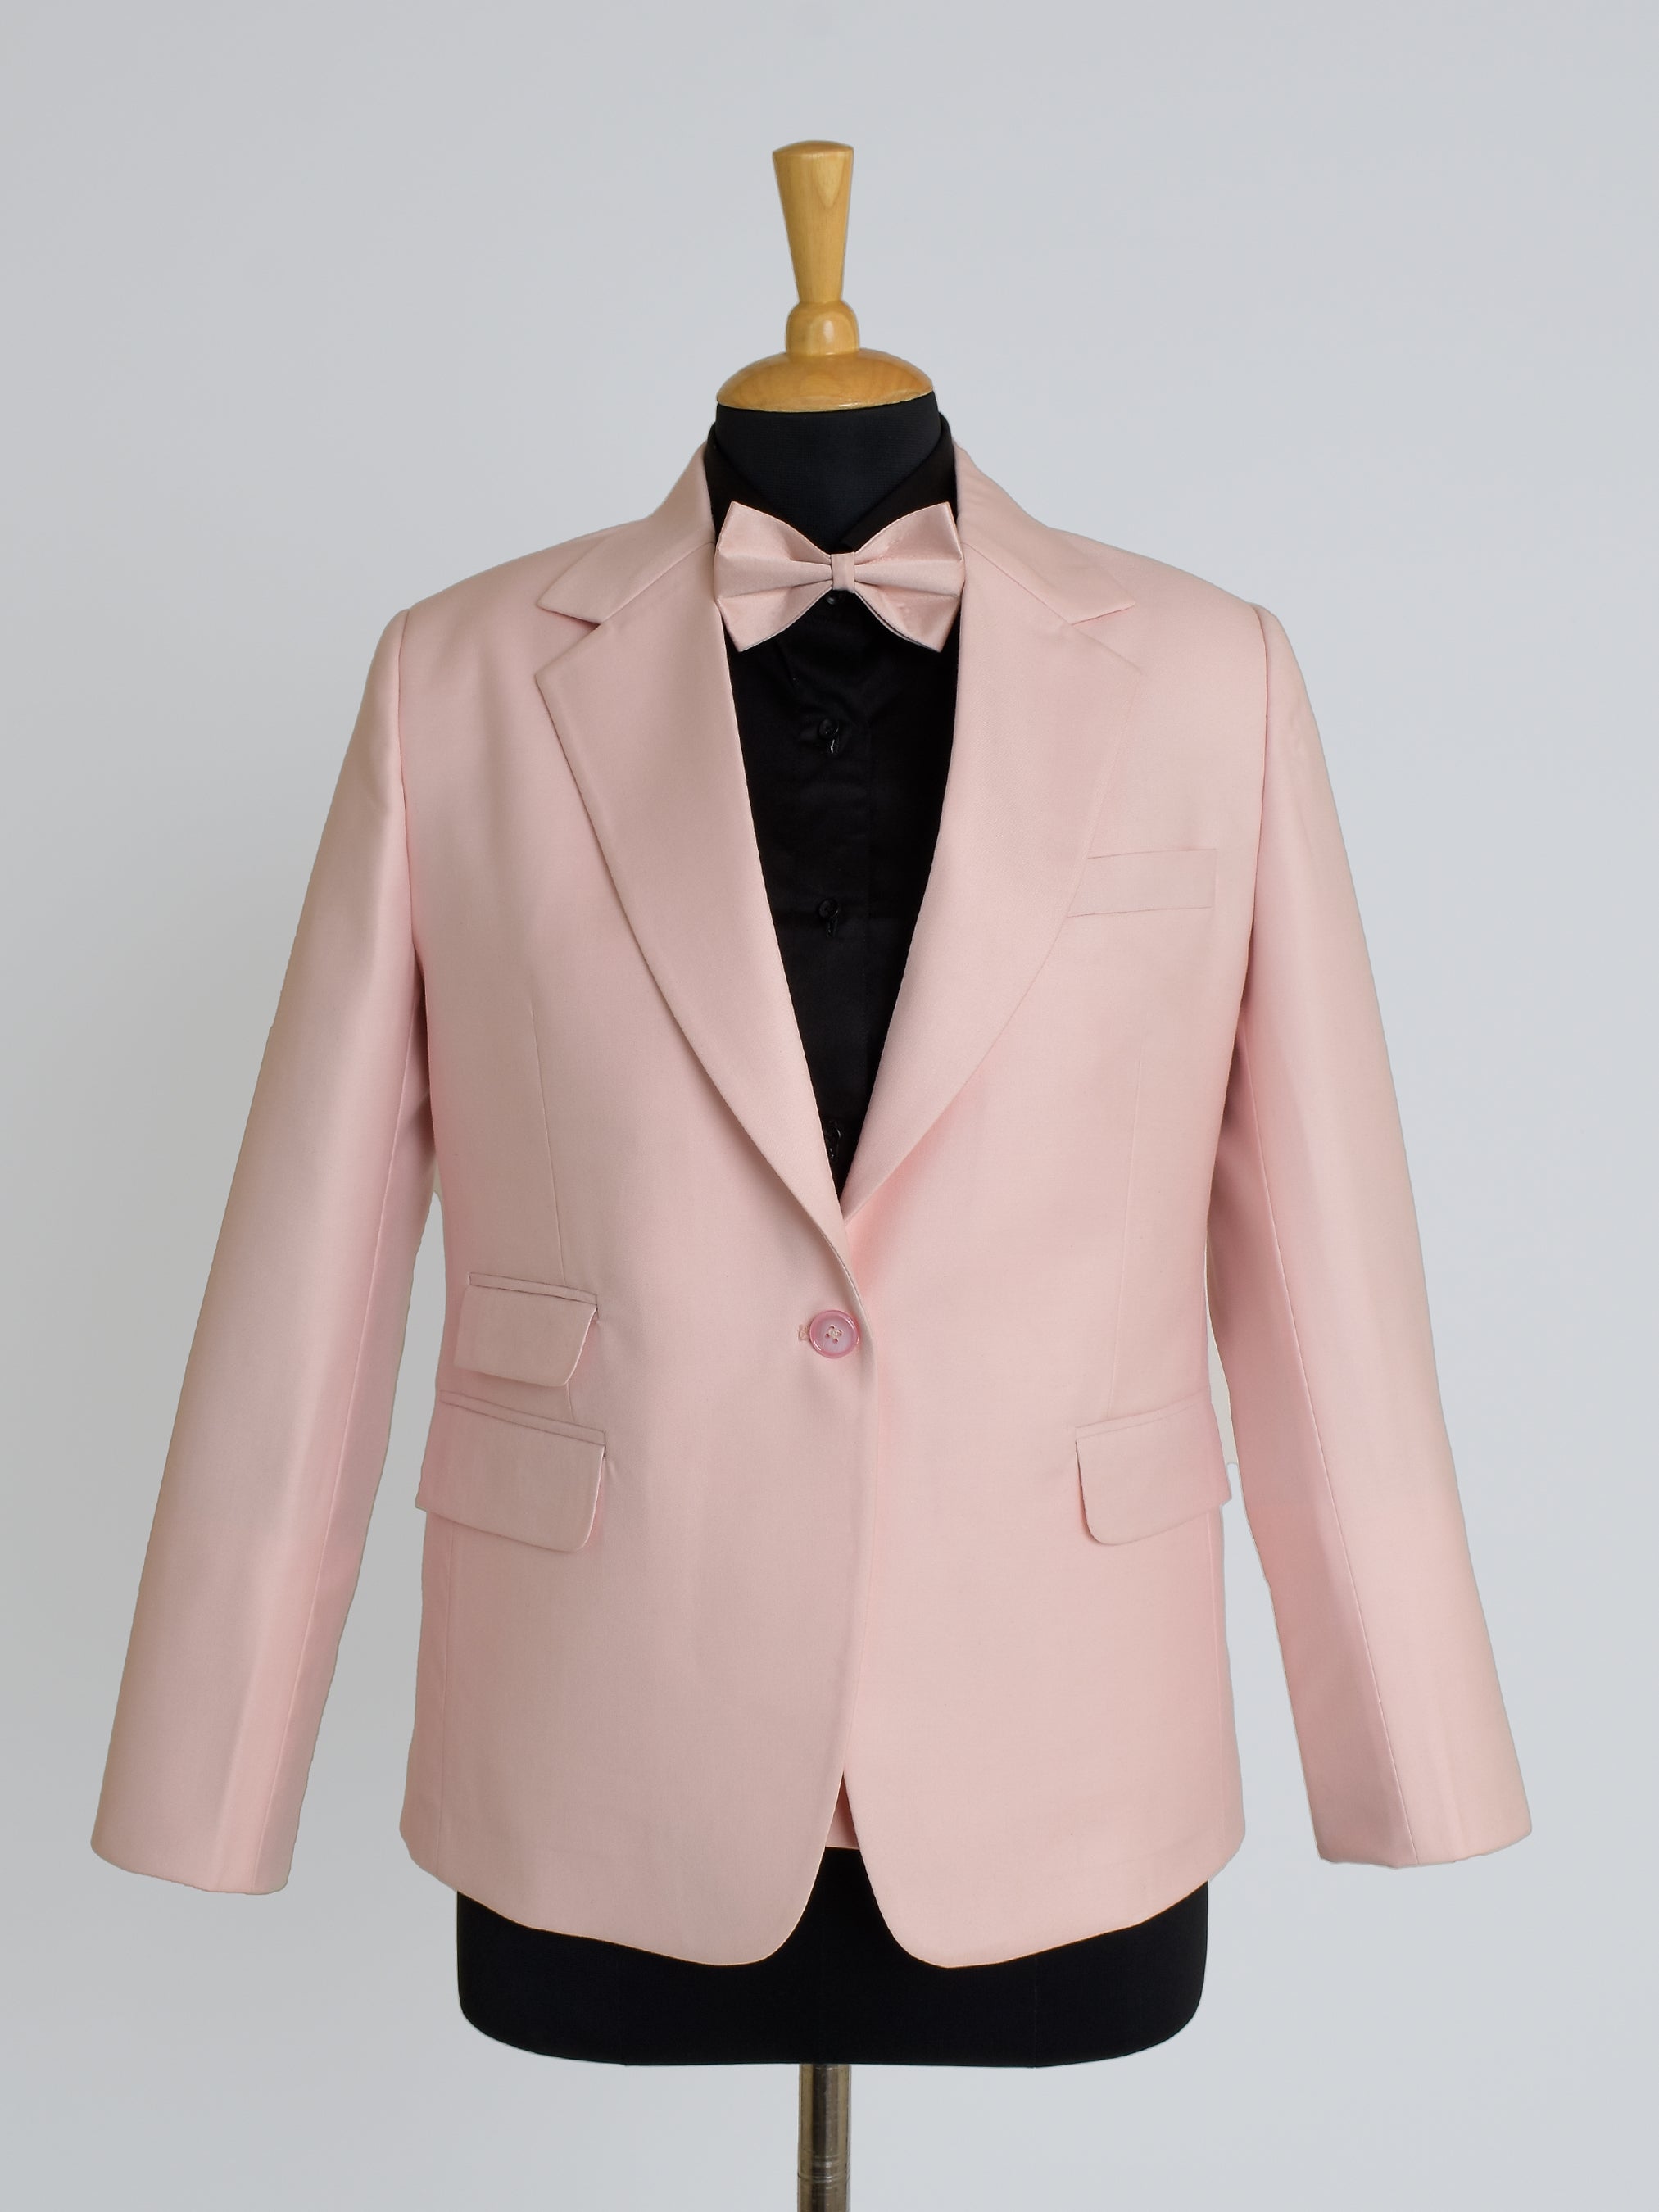 The Blush Farewell Suit